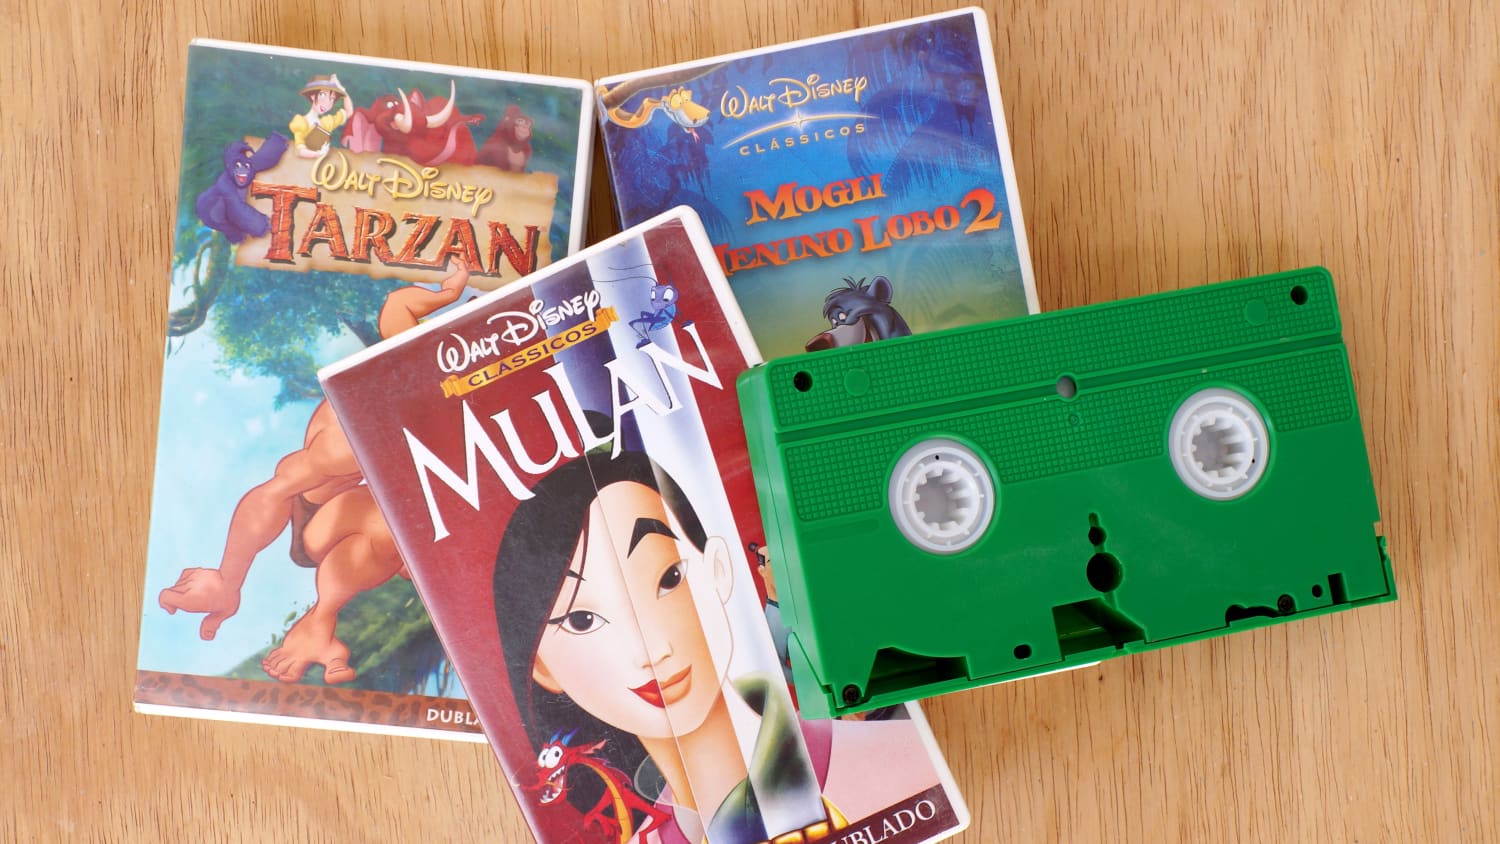 Vintage VHS Tapes Selling Price